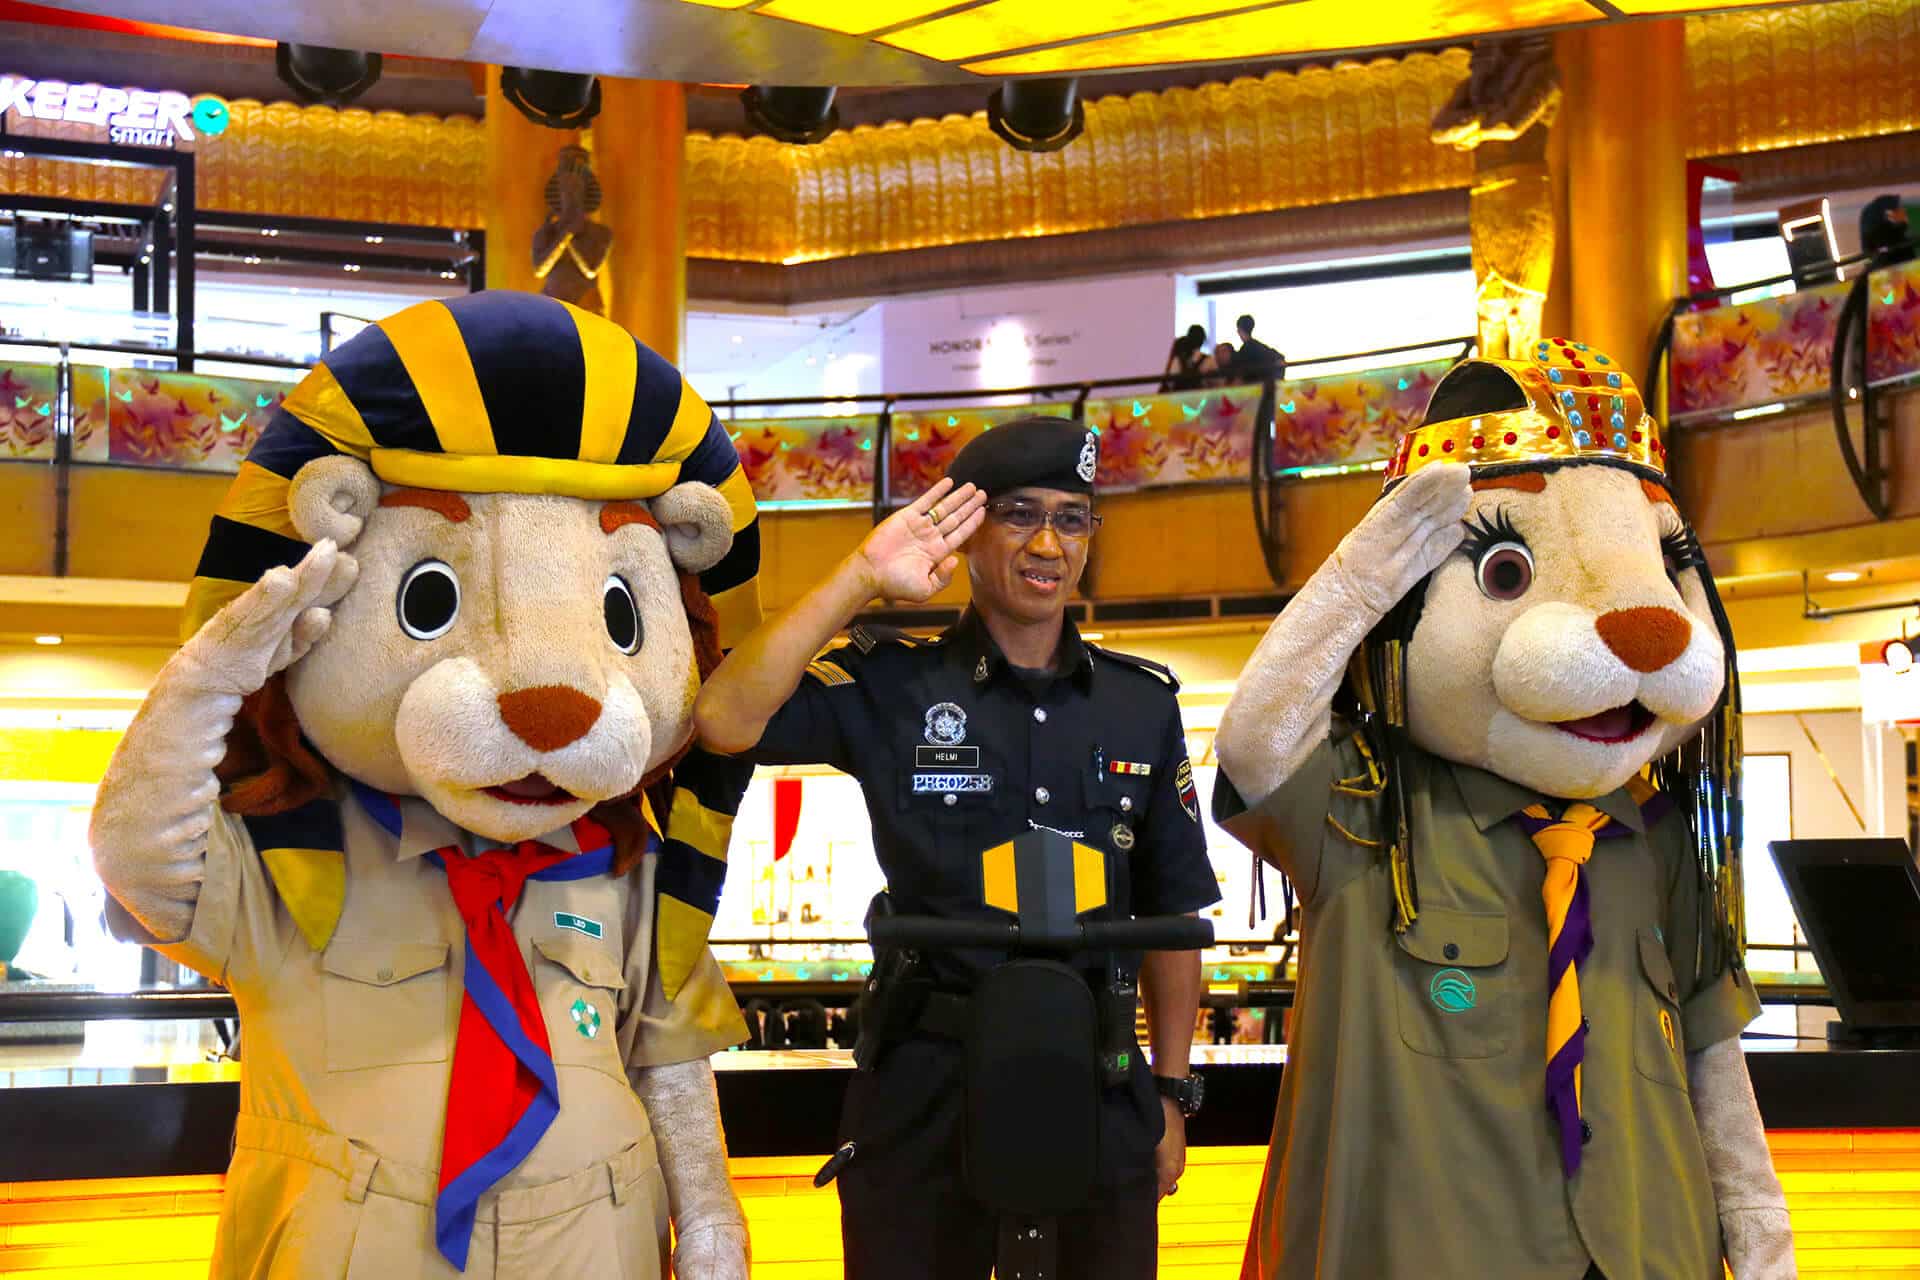 we have Leo and Leona! Meet these majestic mascots of Sunway Pyramid, who serve as the ultimate protective duo for families.